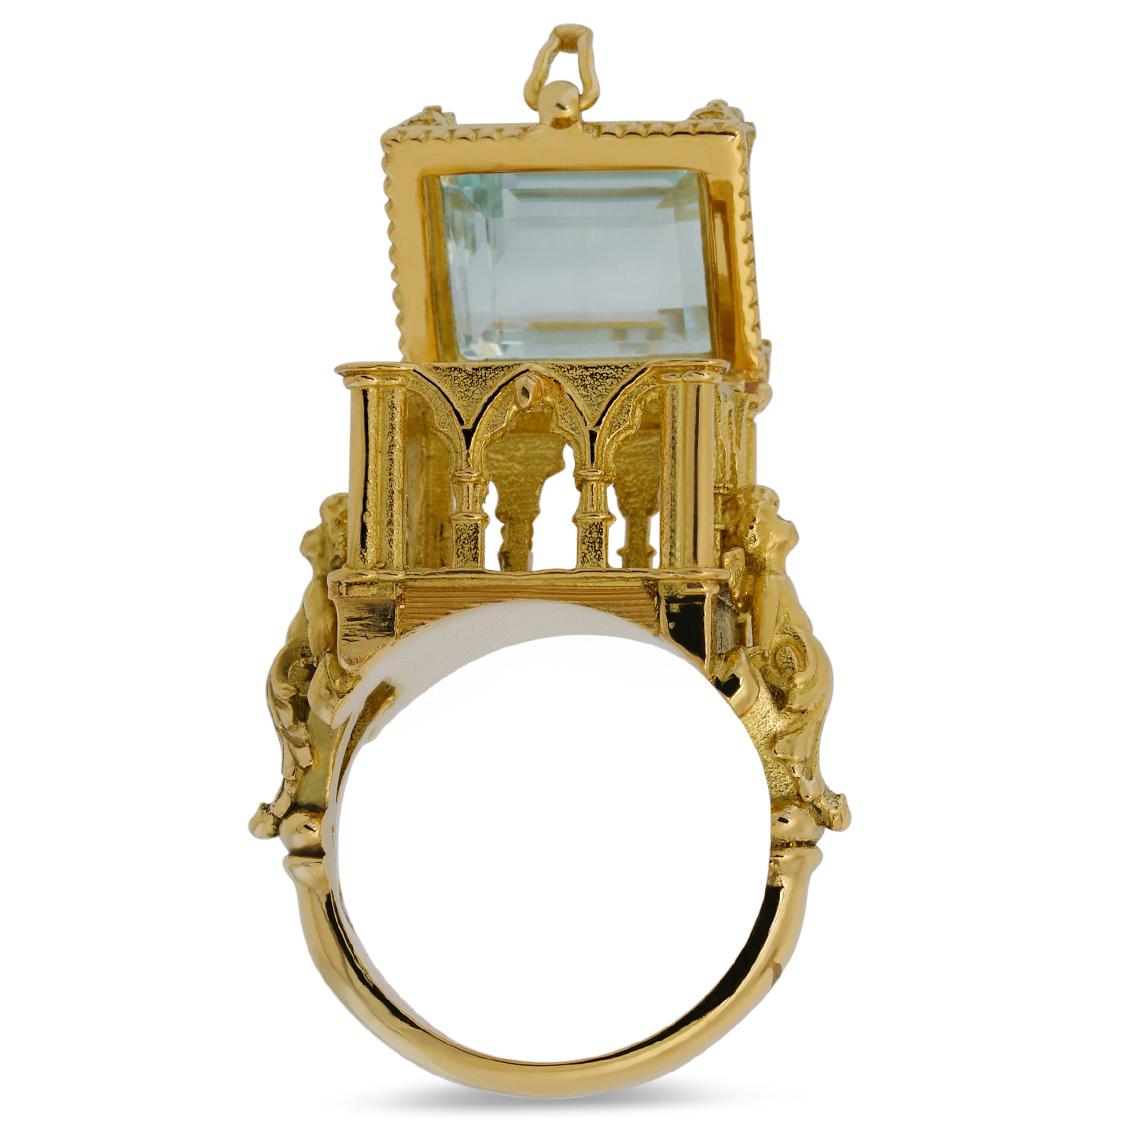 Women's or Men's Galerie des Glaces Cathedral Poison Ring in 18 Karat Yellow Gold with Aquamarine